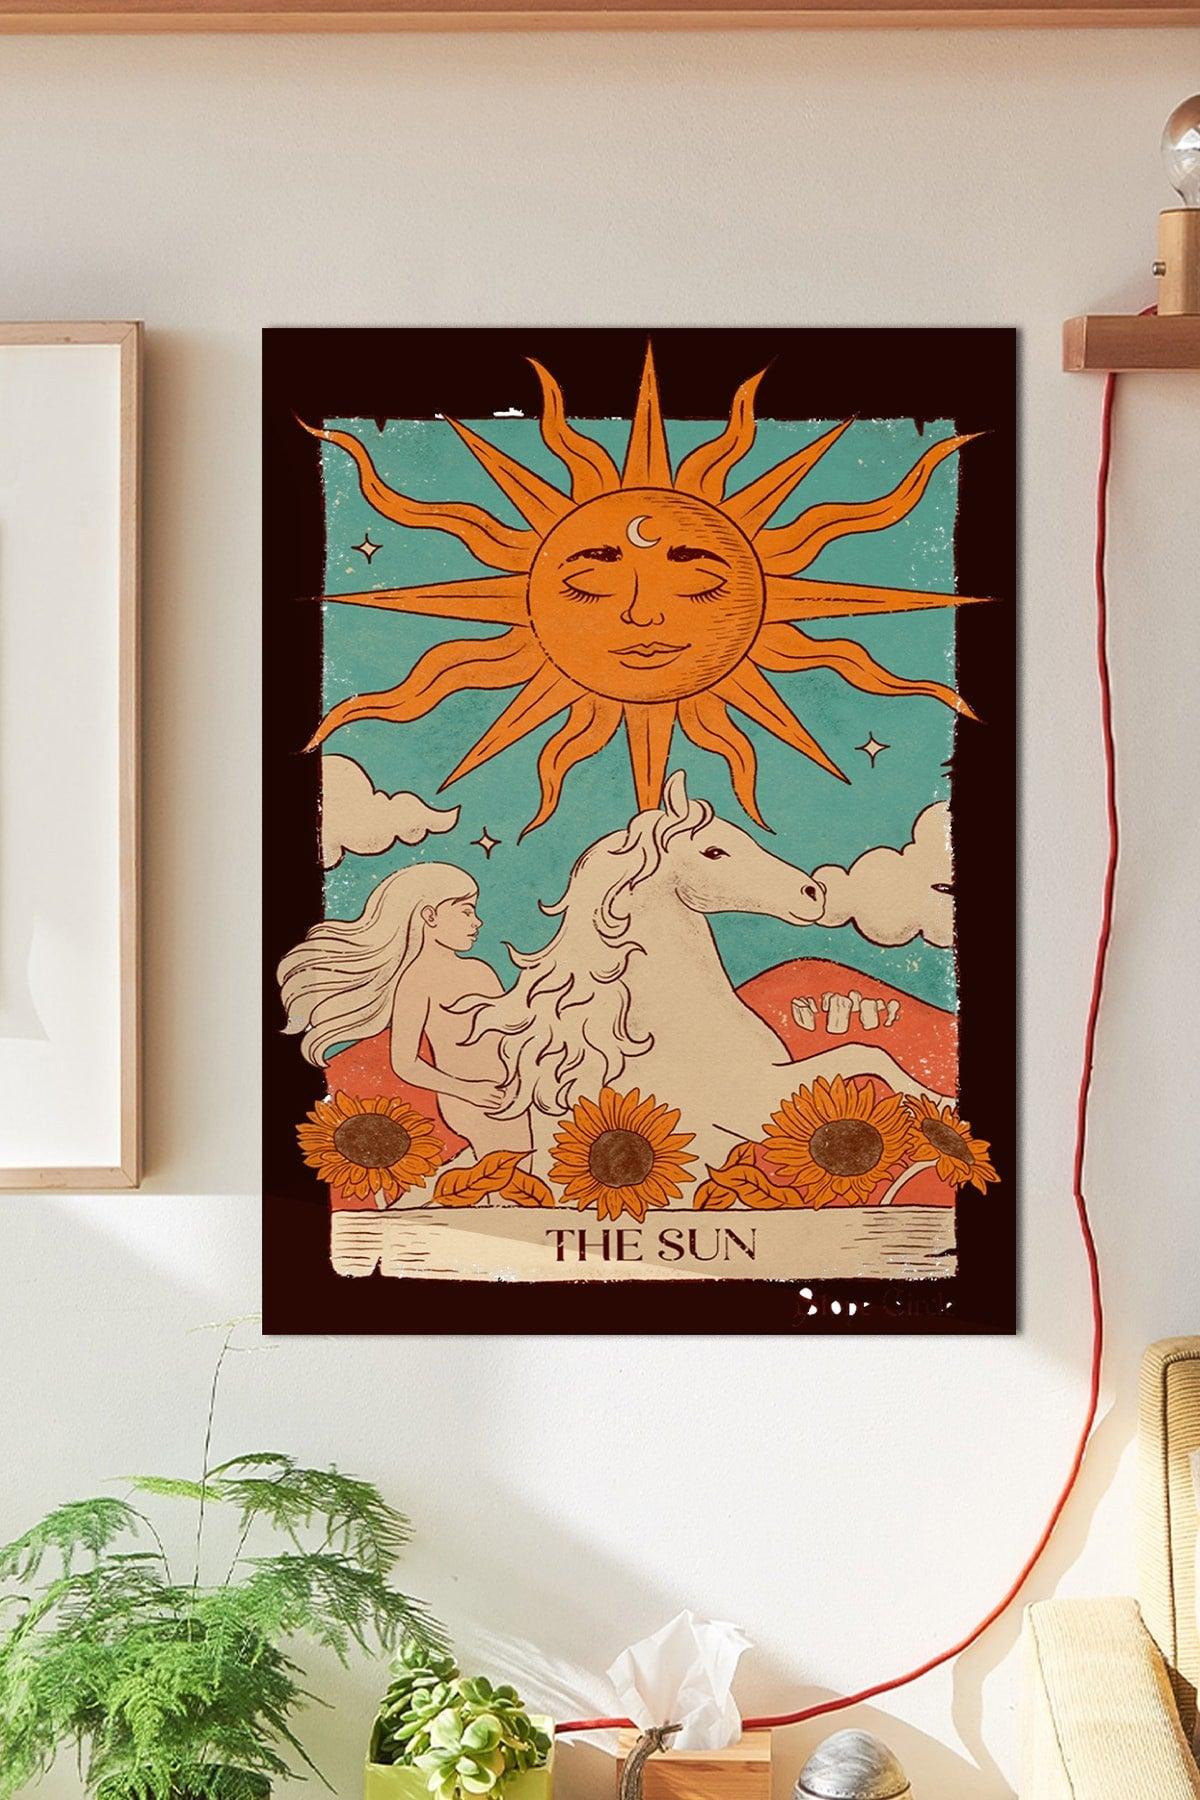 The Sun Wall Poster Large 45x30 Cm - Swordslife